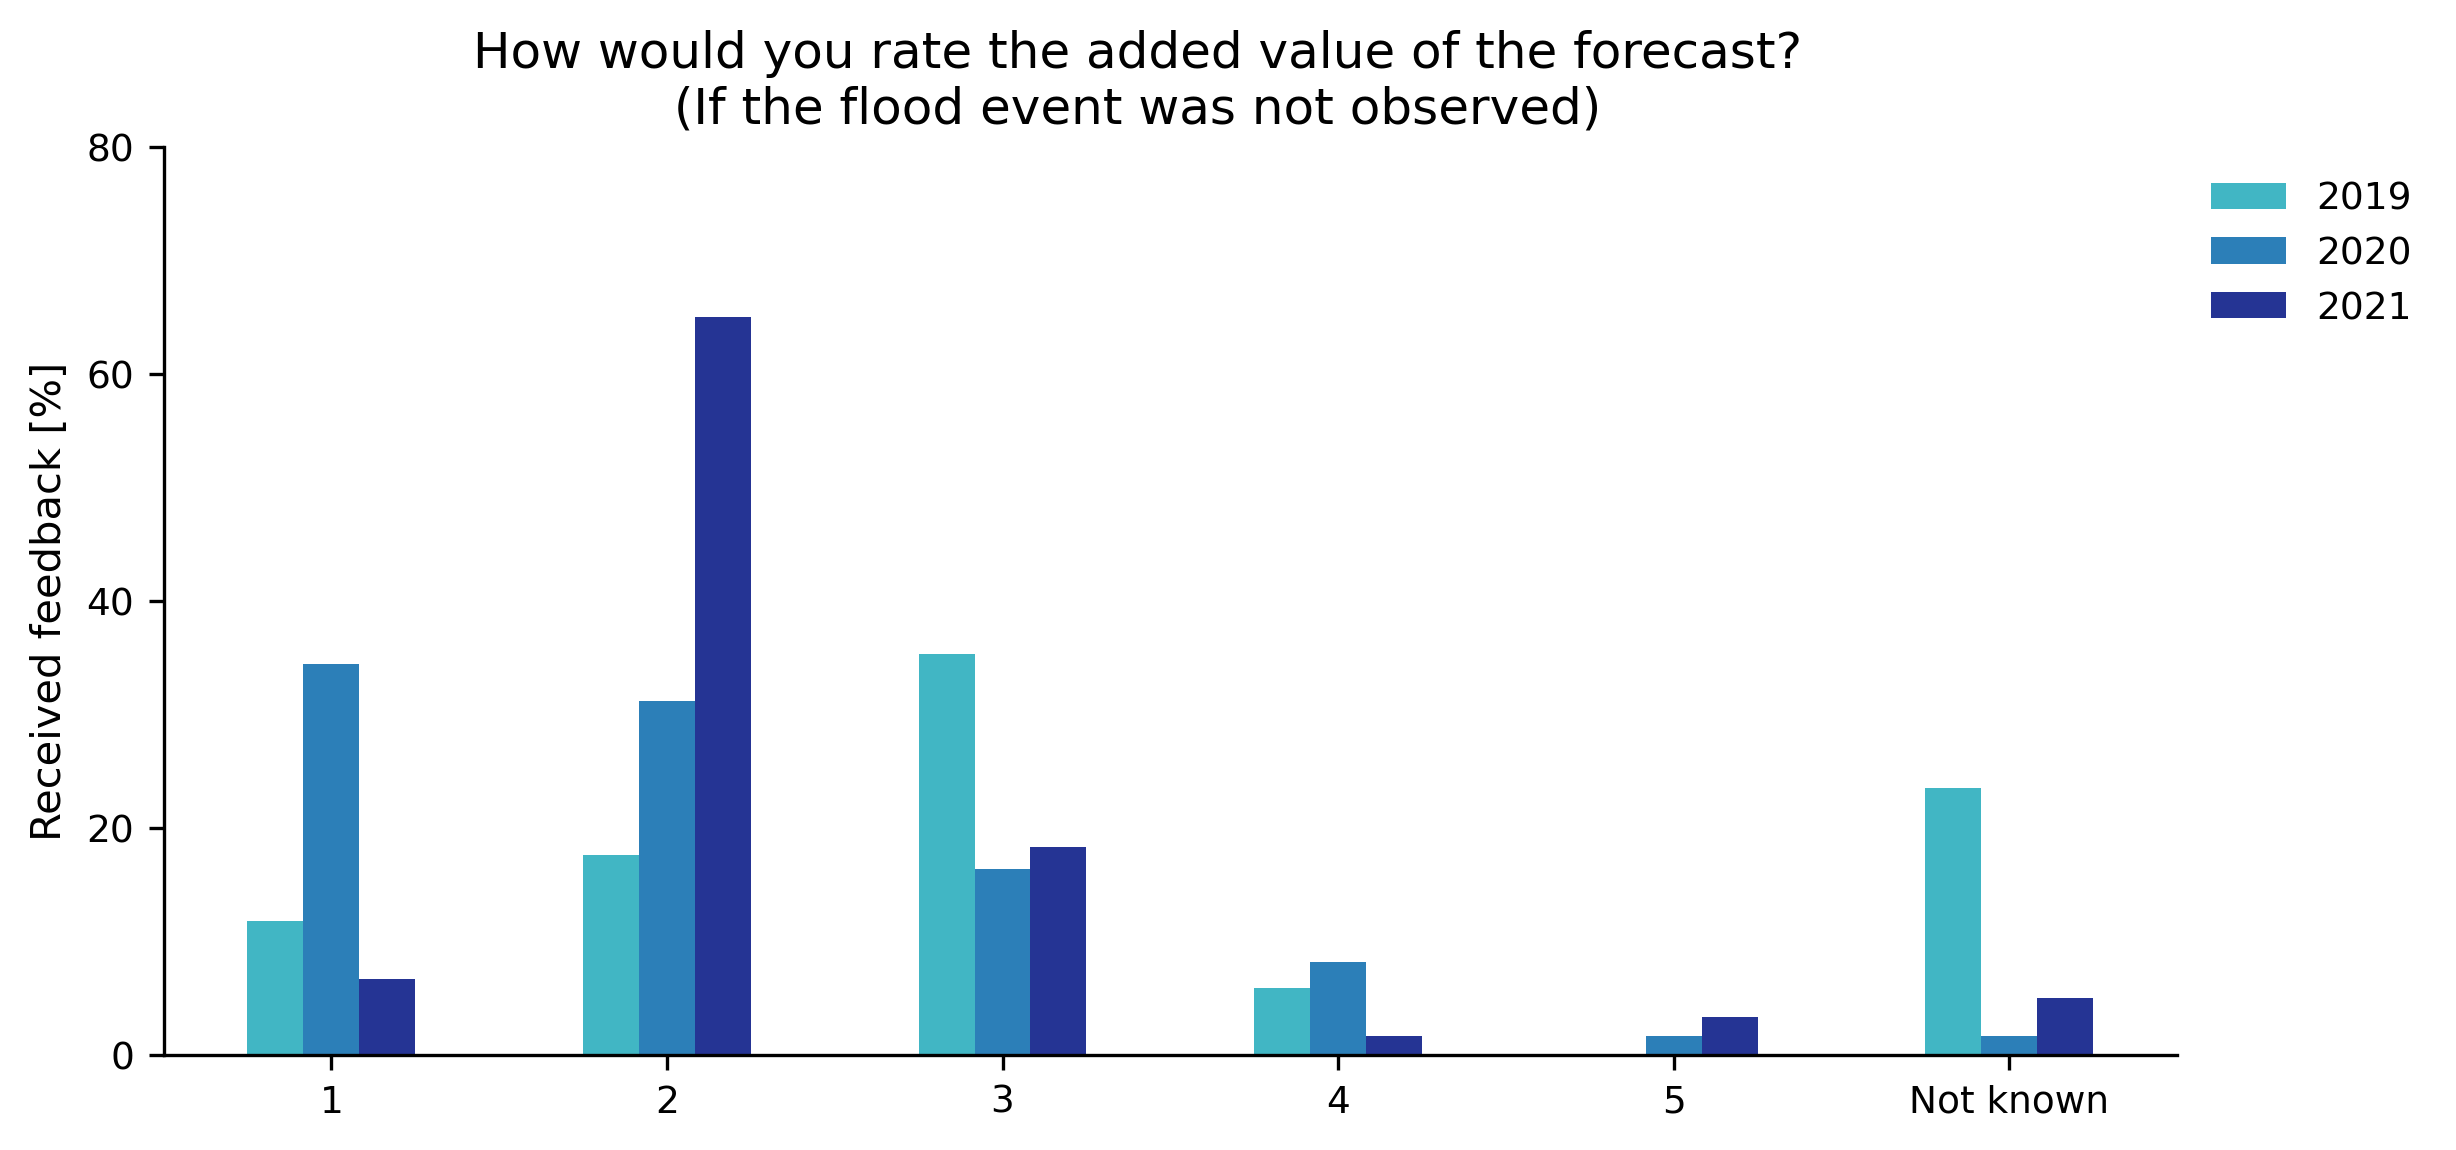 Figure 13. Partners' response to the question "How would you rate the added value of the forecast?" of the forecast survey for instances where a flood event was not observed in connection with the Formal Flood Notification. A value of 1 corresponds too little to no added value and a value of 5 corresponds to a significant added value.